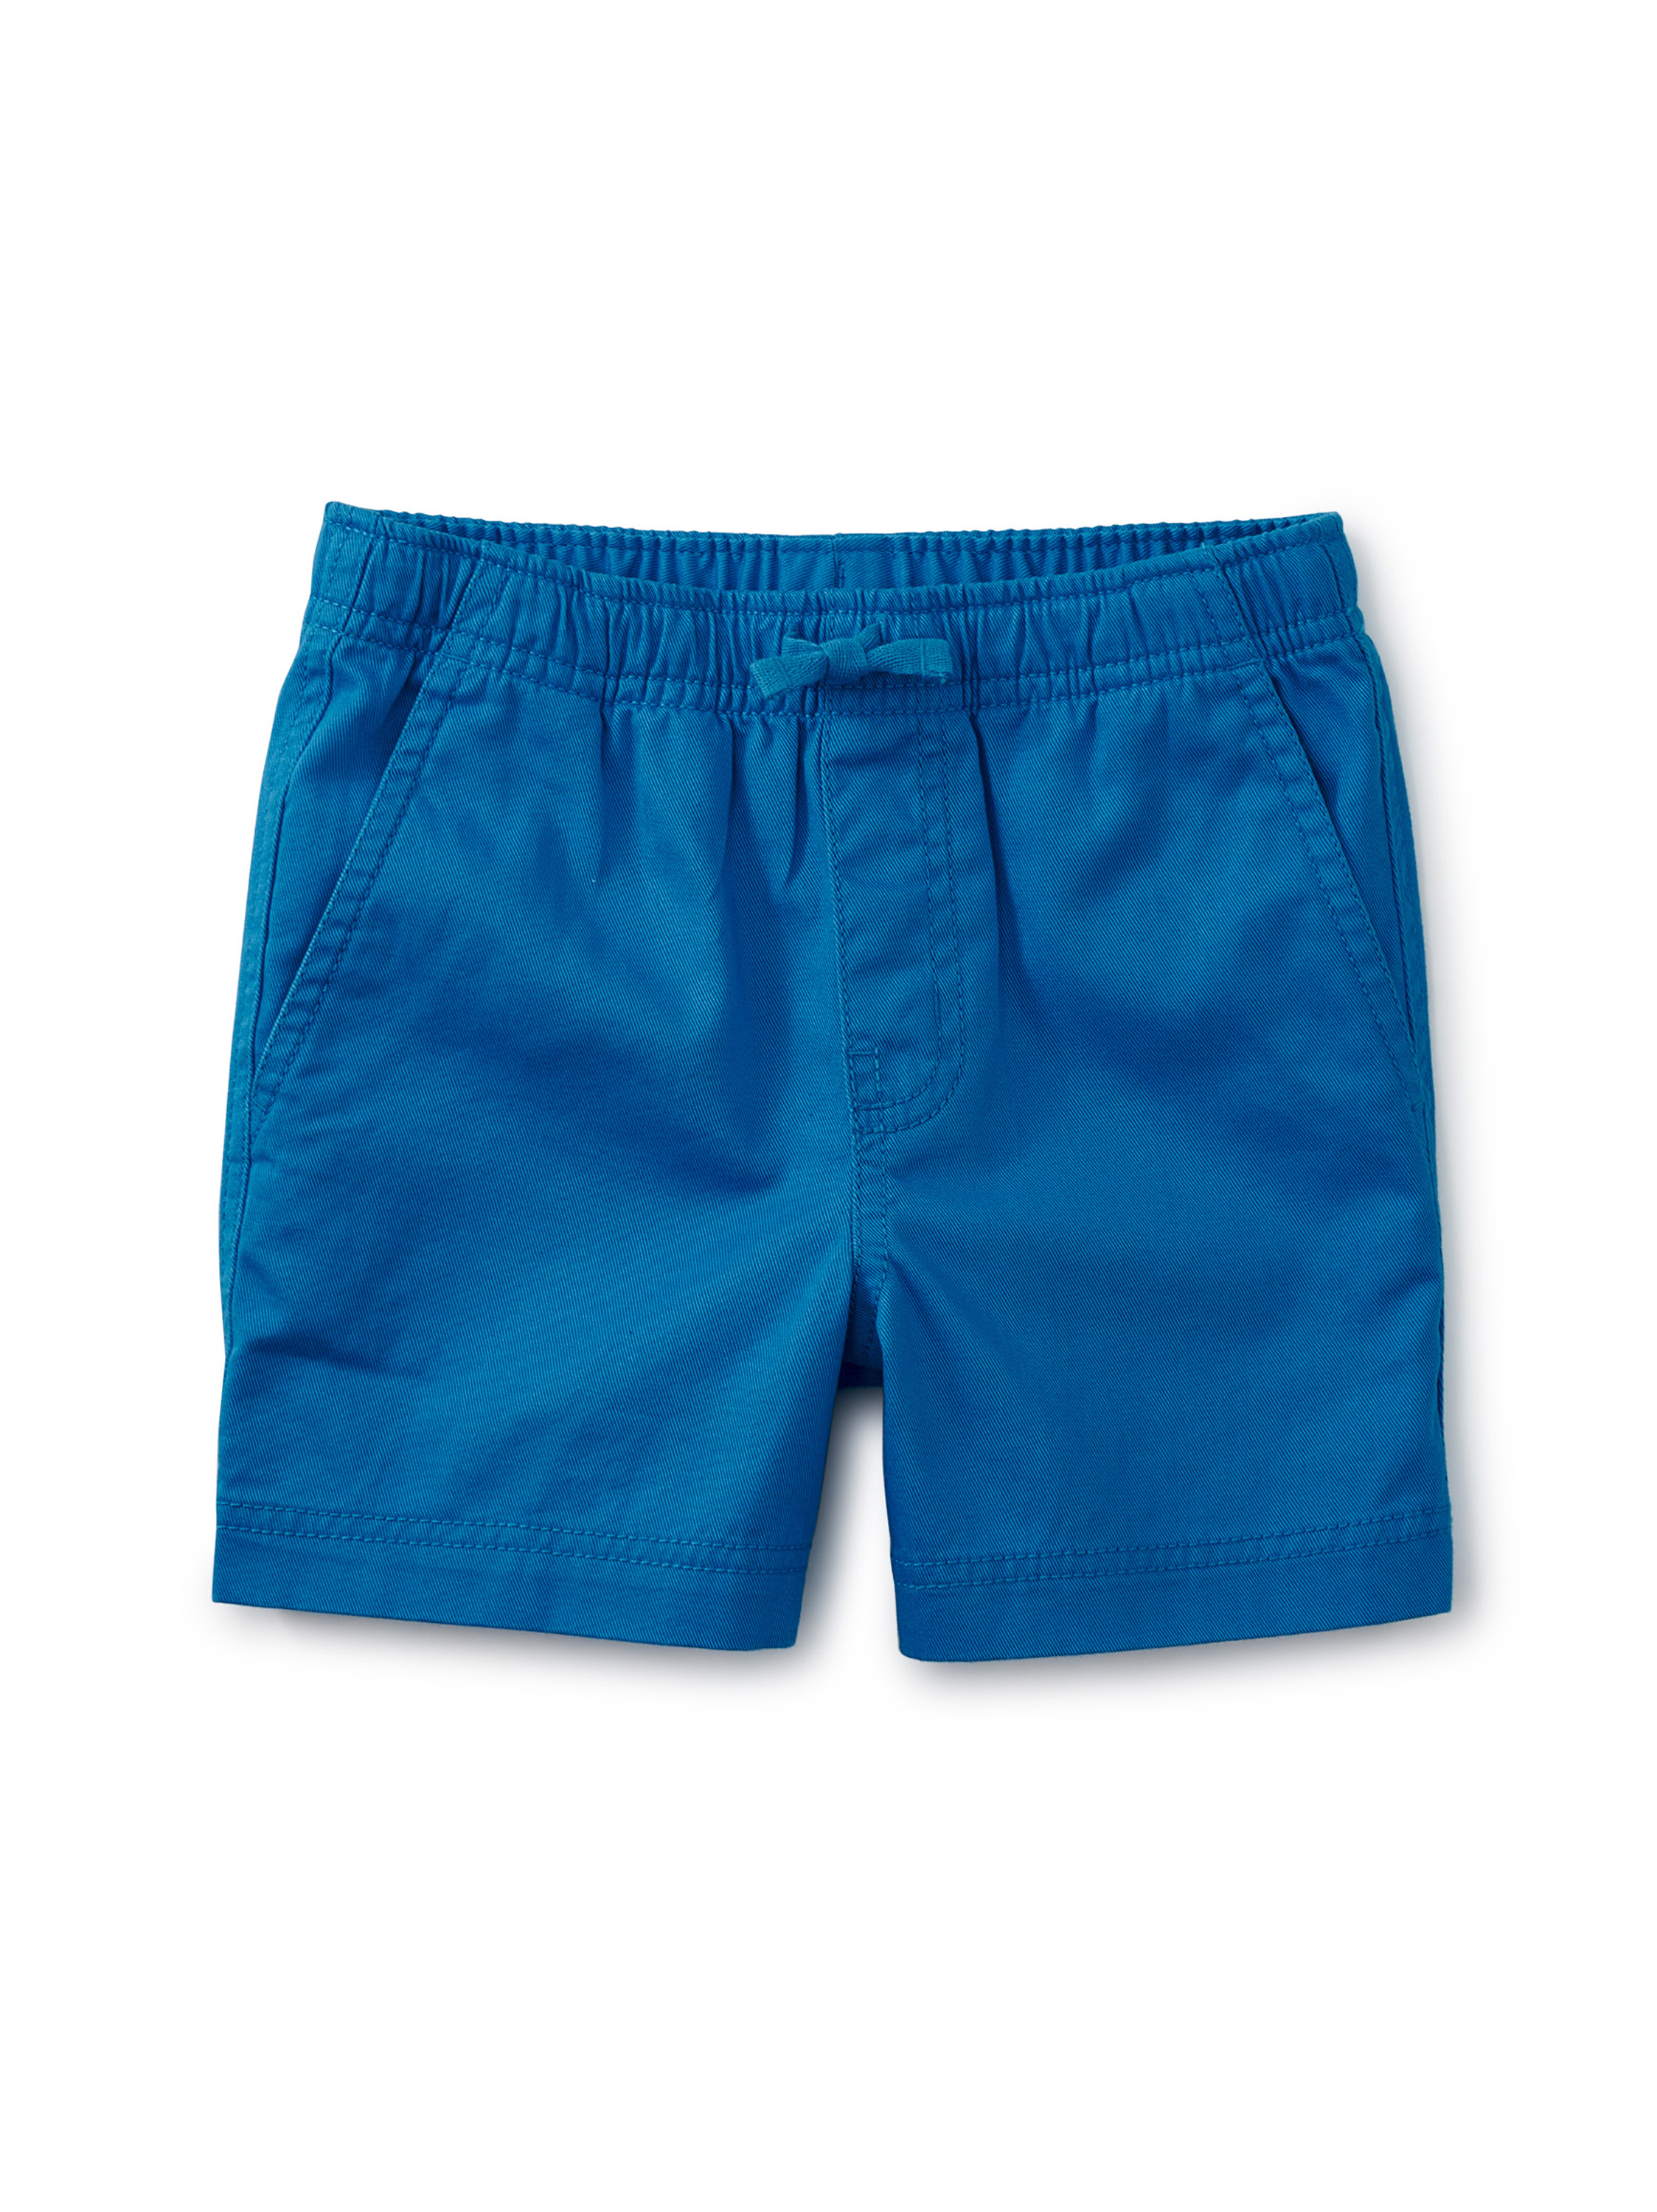 Twill Sport Shorts | Tea Collection